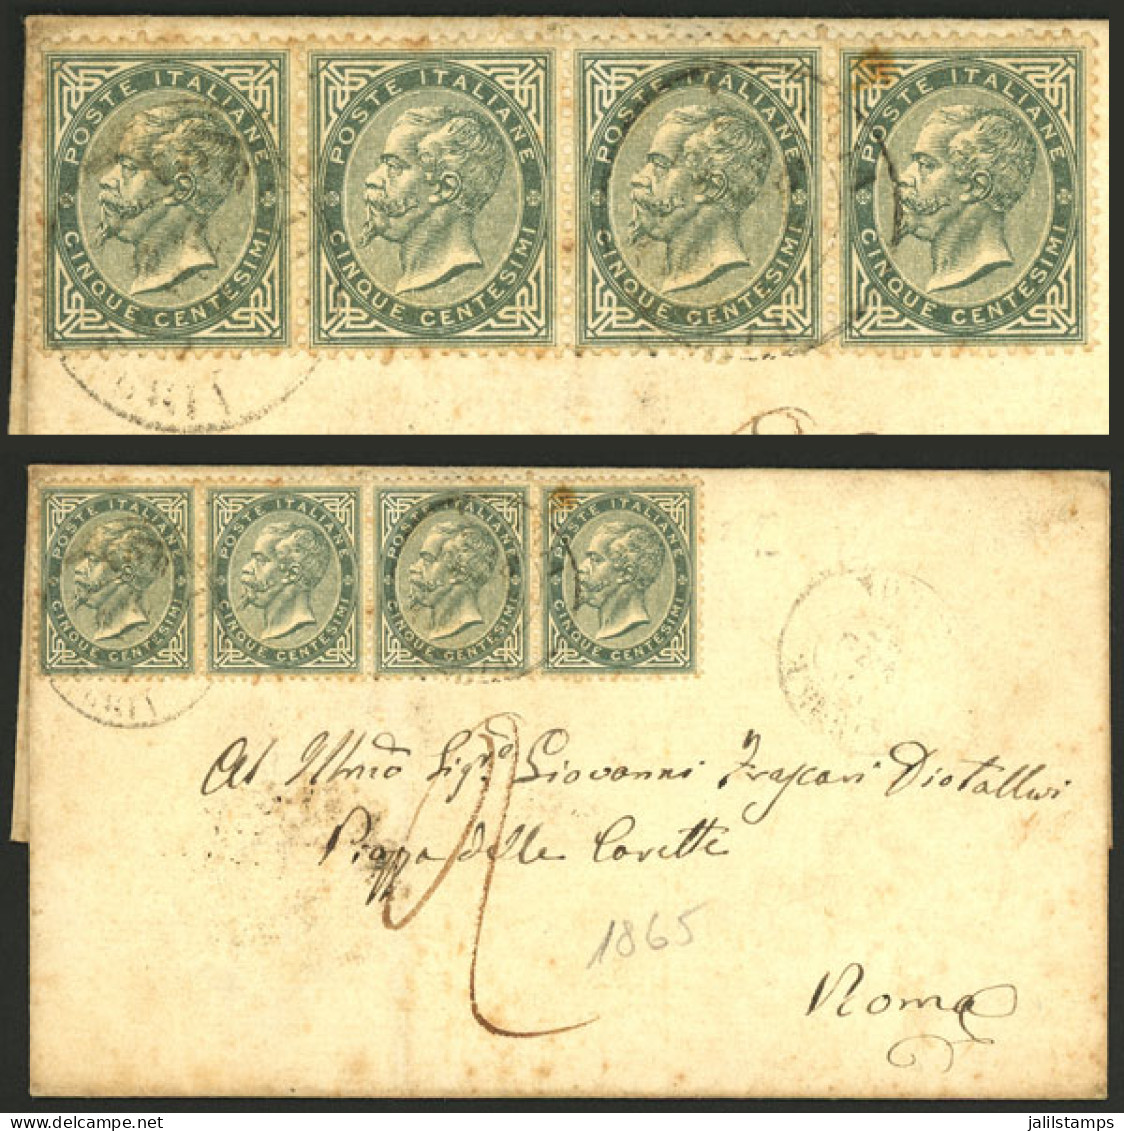 ITALY: Folded Cover Used In Roma In JA/1865, Franked With 20c. (Sc.26 Strip Of 4), Very Nice! - Unclassified